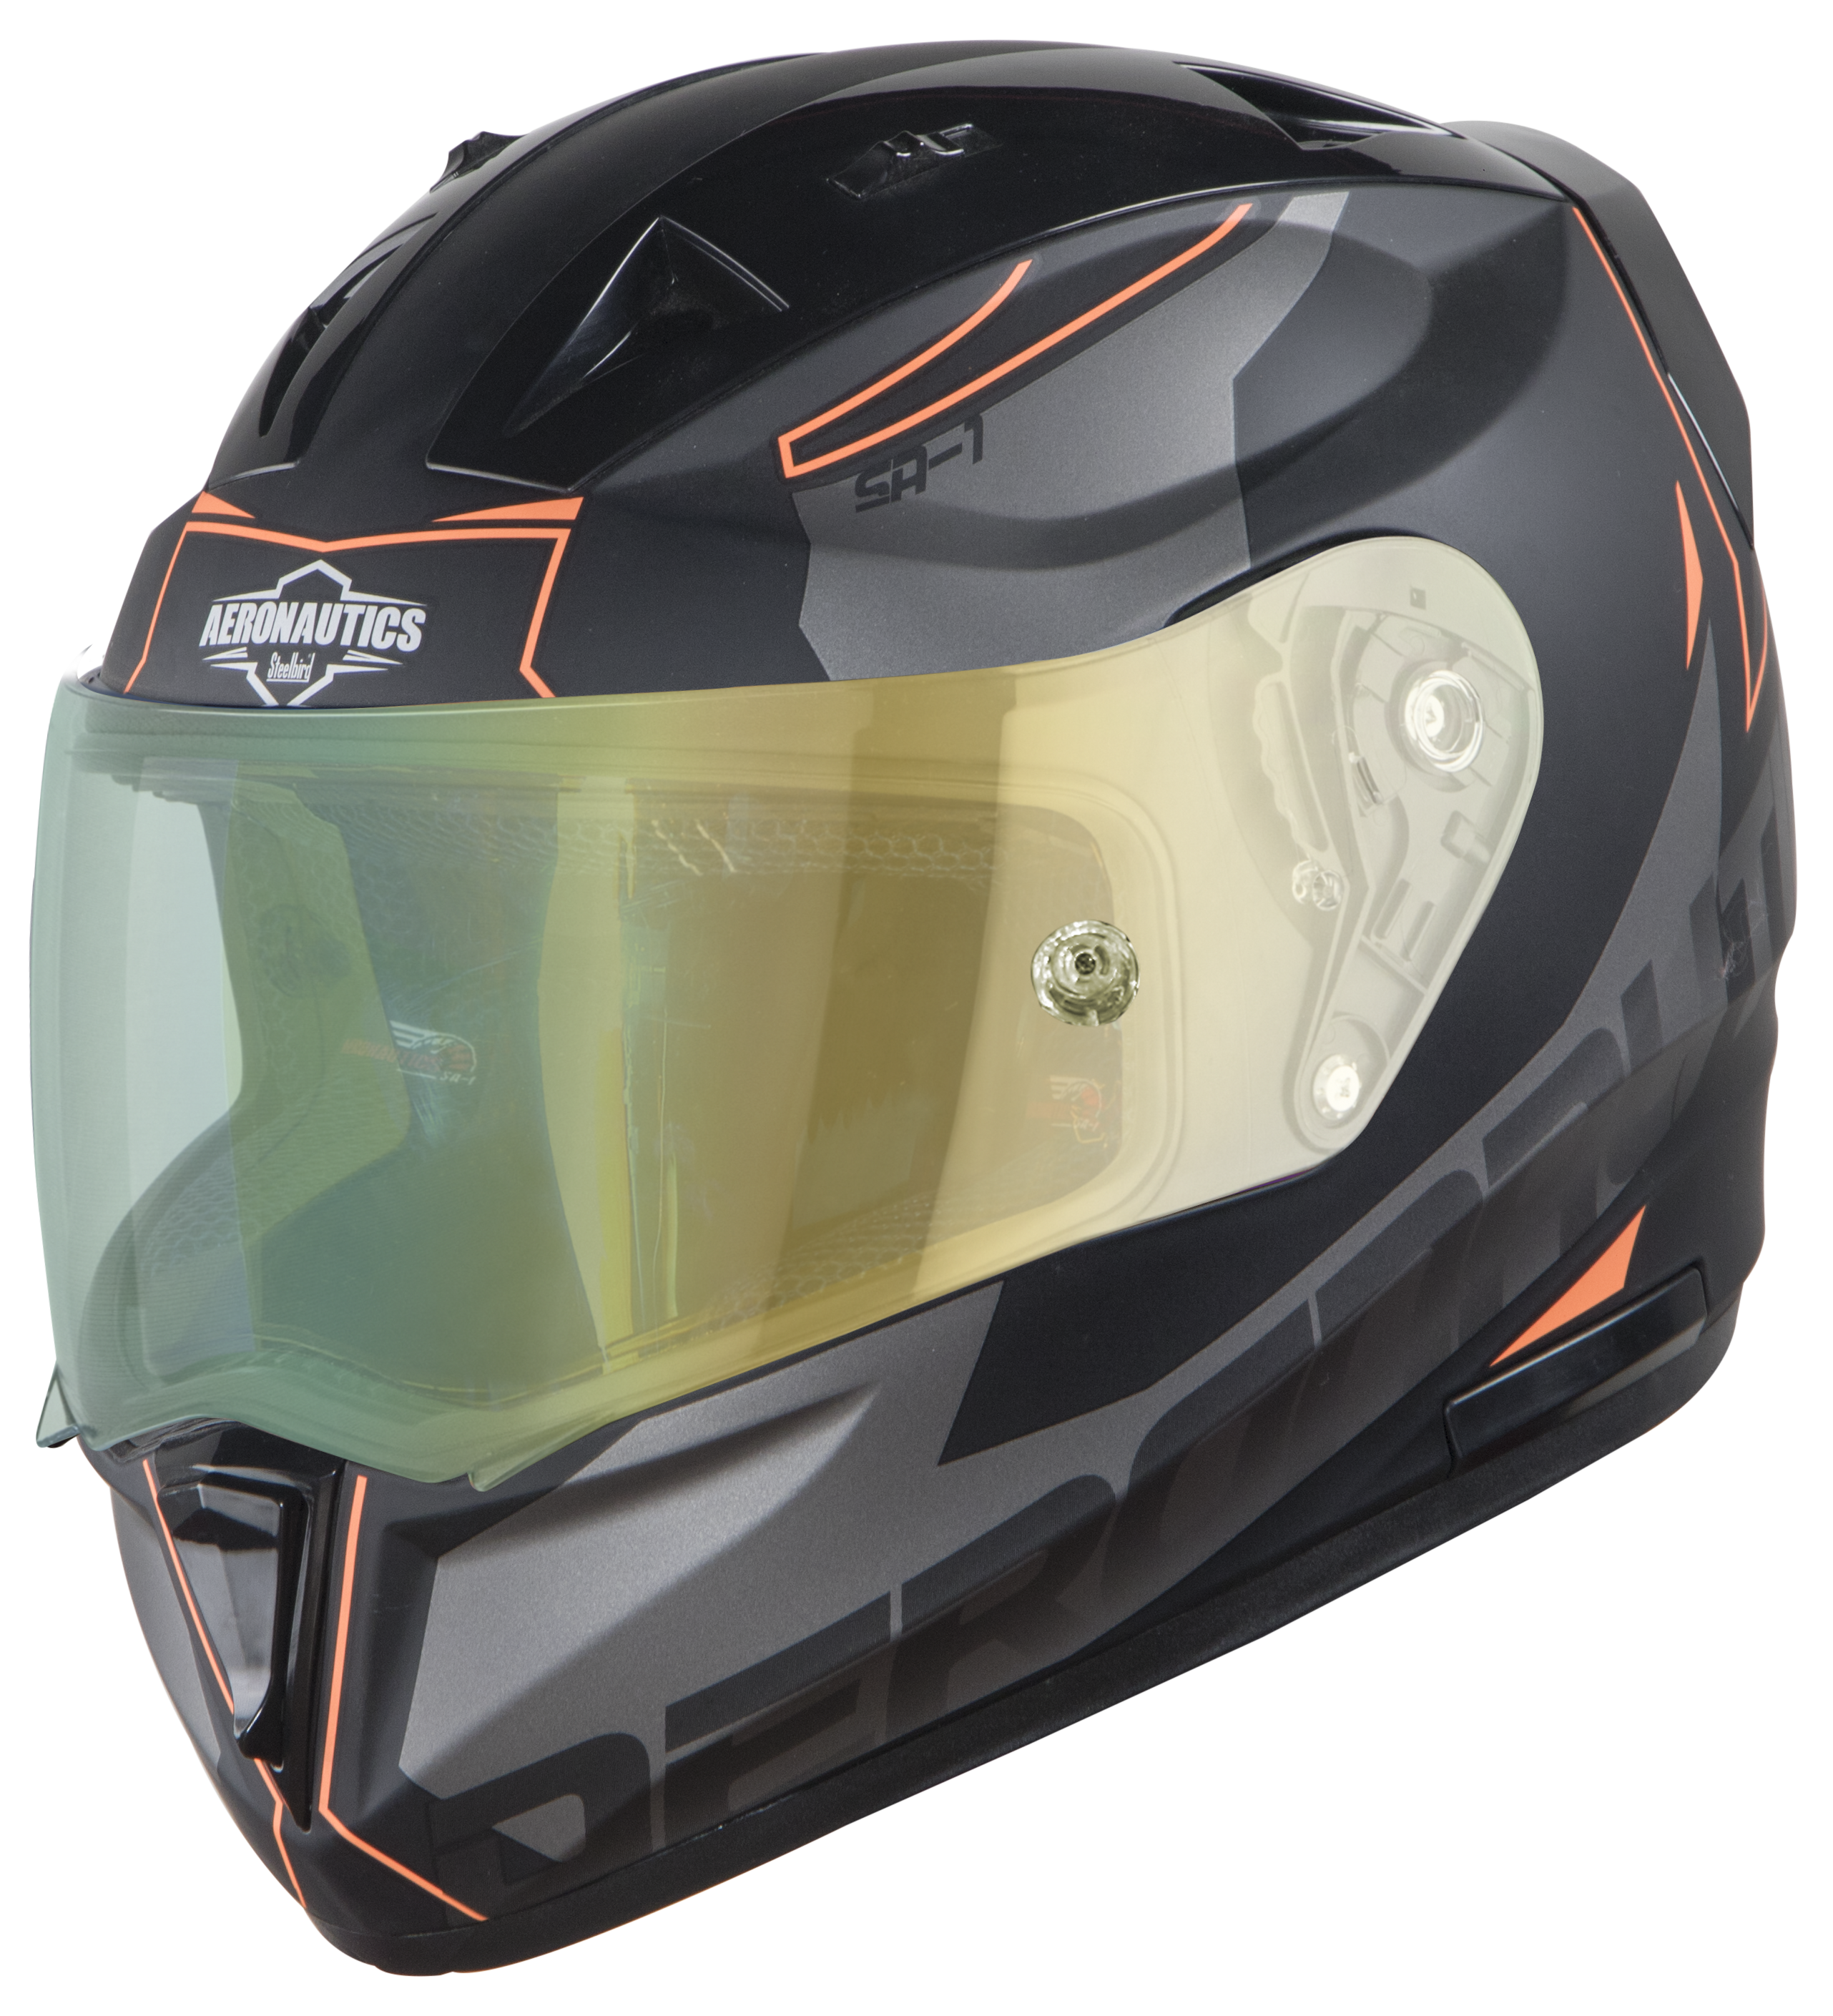 SA-1 RTW Mat Black/Orange With Anti-Fog Shield Green Night Vision Visor(Fitted With Clear Visor Extra Green Night Vision Anti-Fog Shield Visor Free)